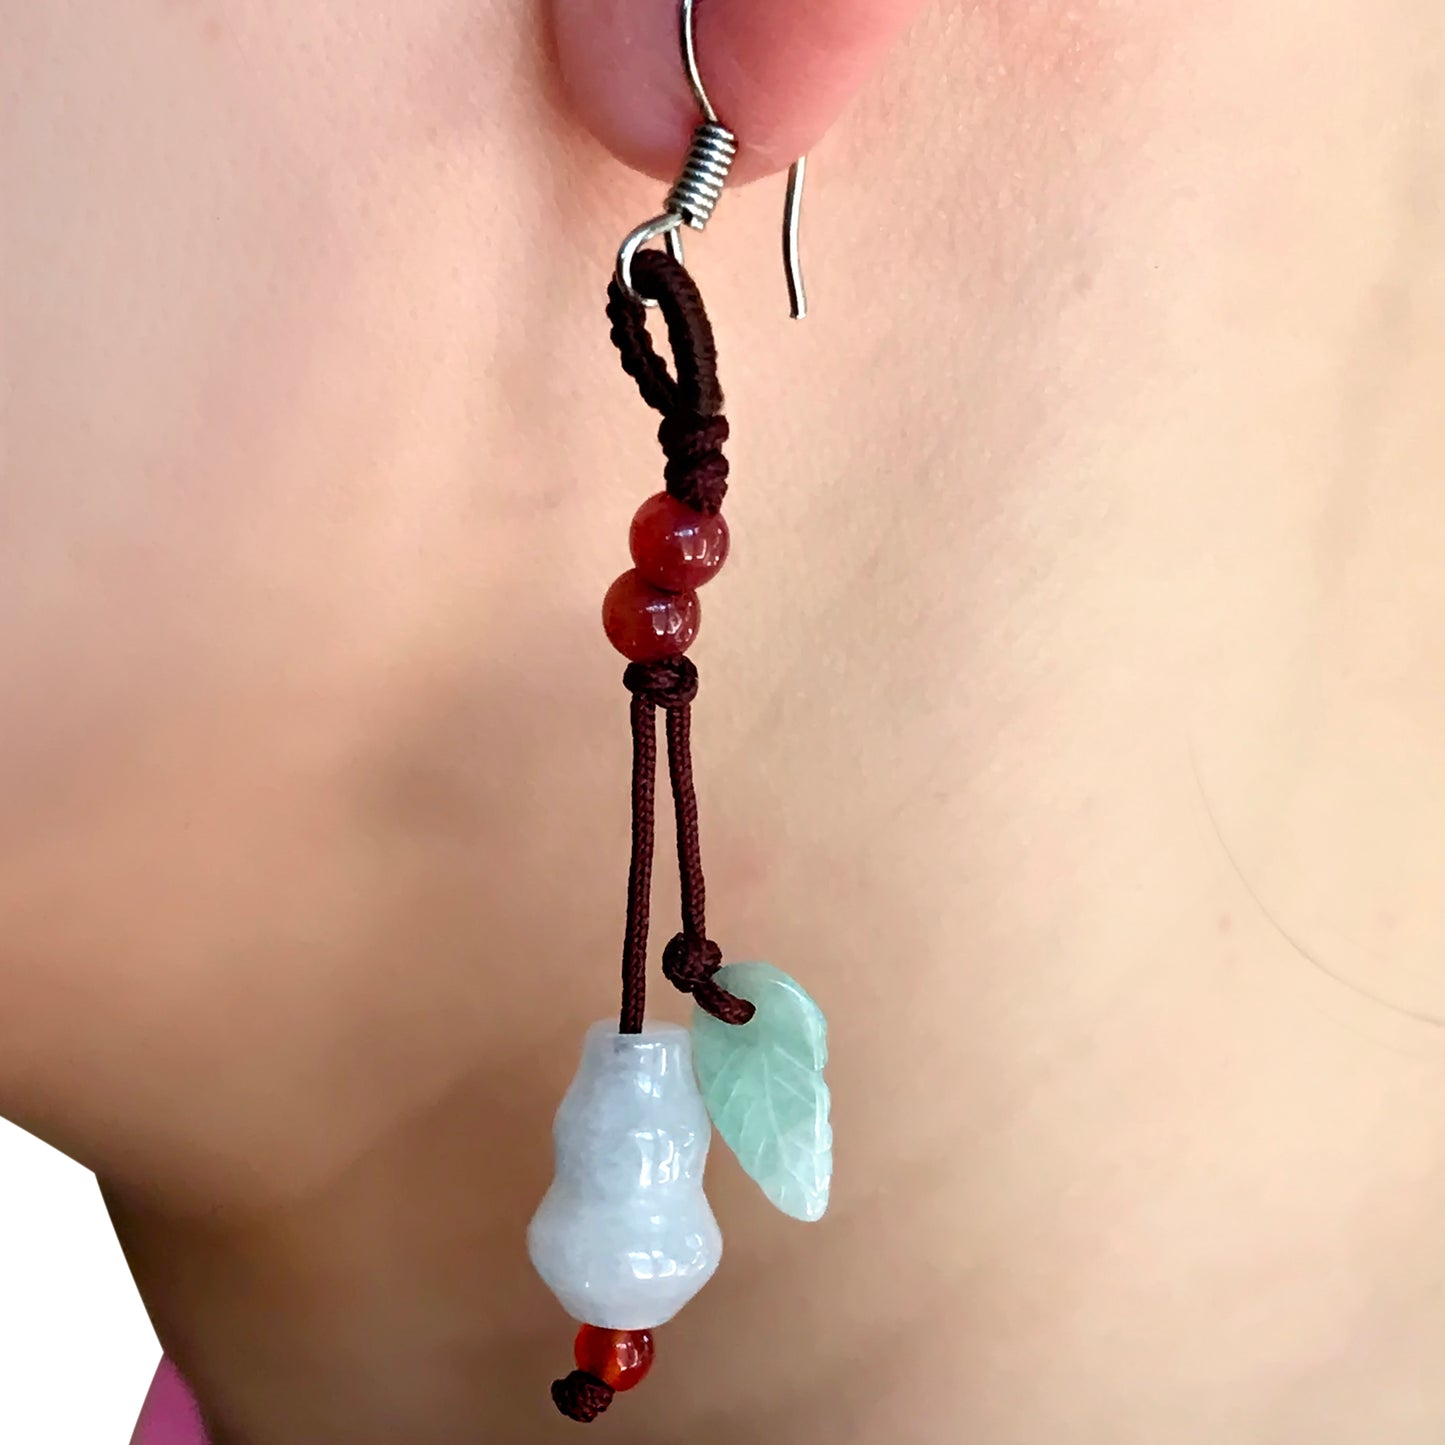 Get Noticed with These Beautiful Fairy Vase and Leaf Jade Earrings